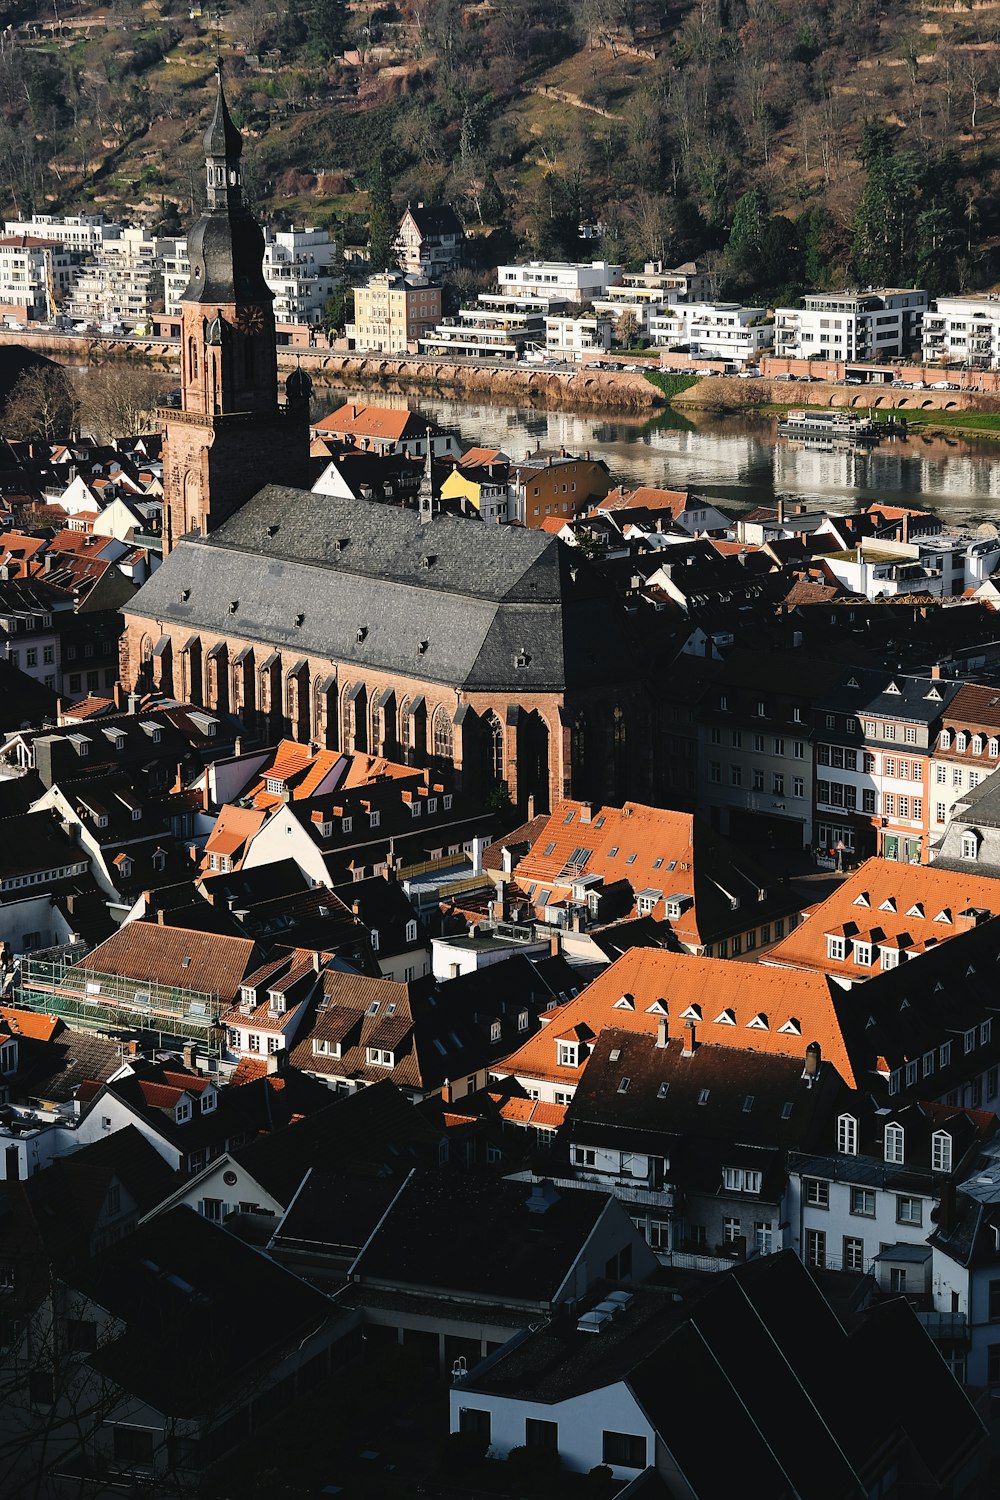 an aerial view of a city with many buildings